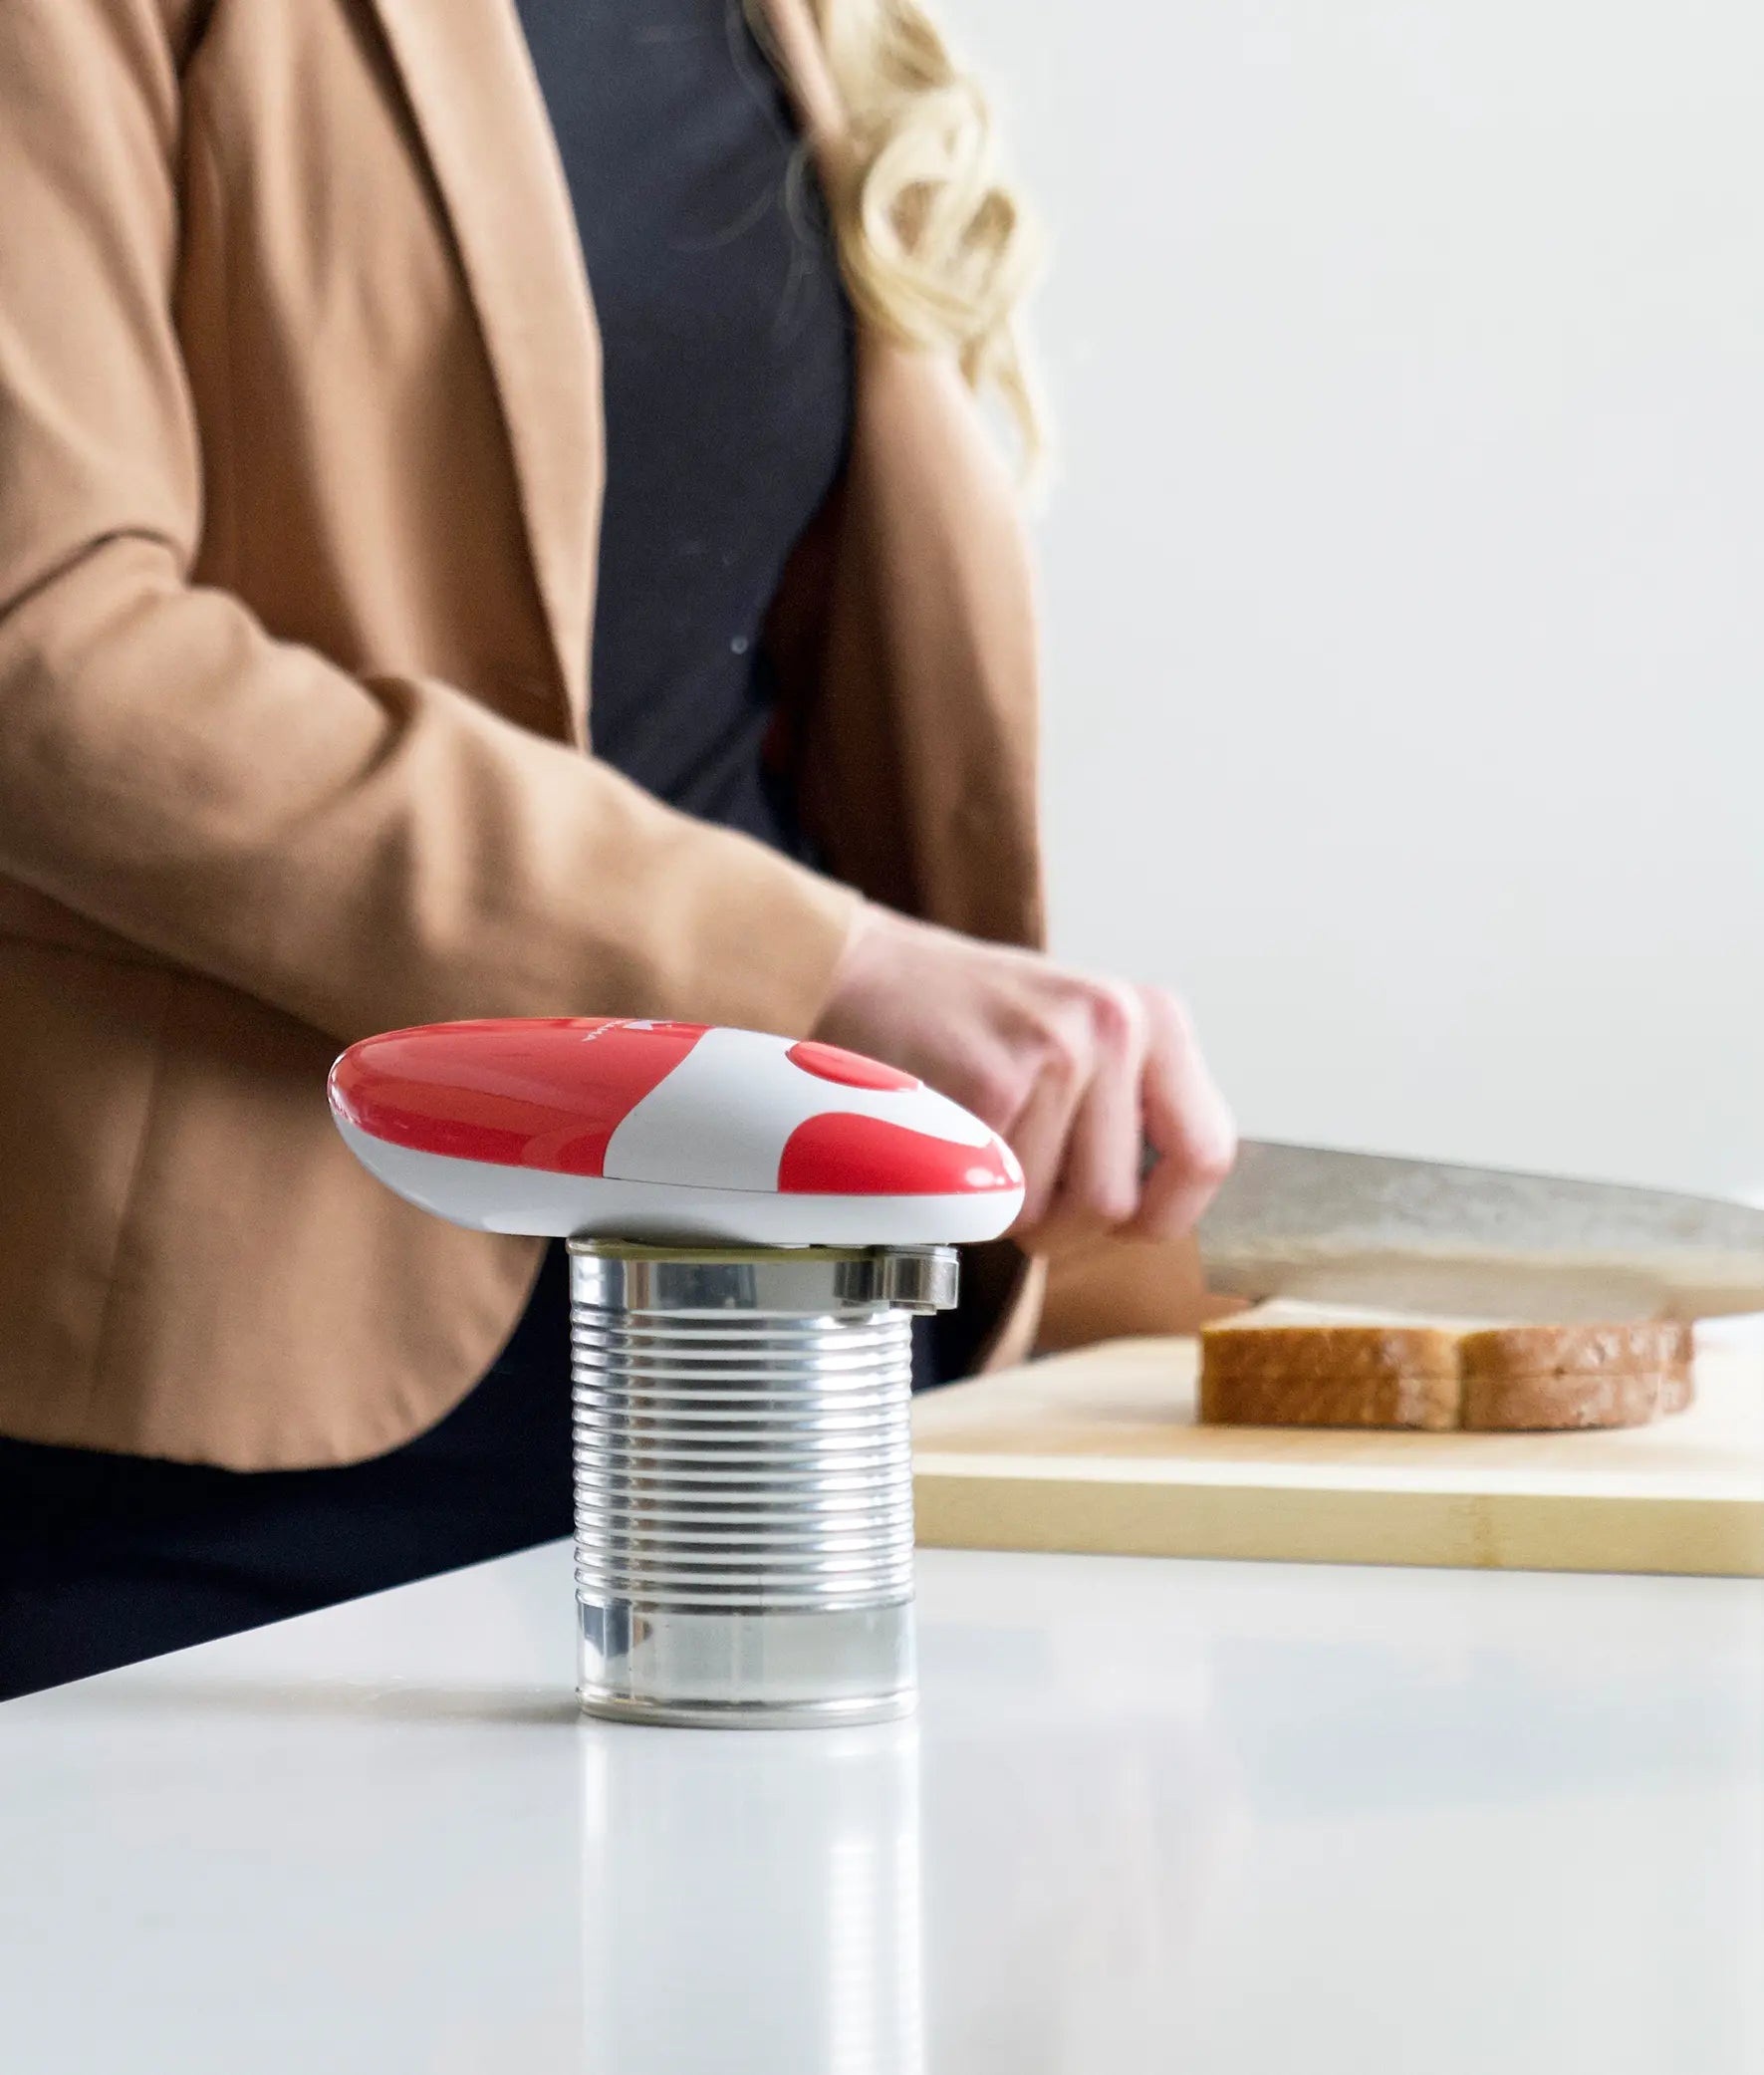 Save your wrists and your sanity with this genius electric can opener